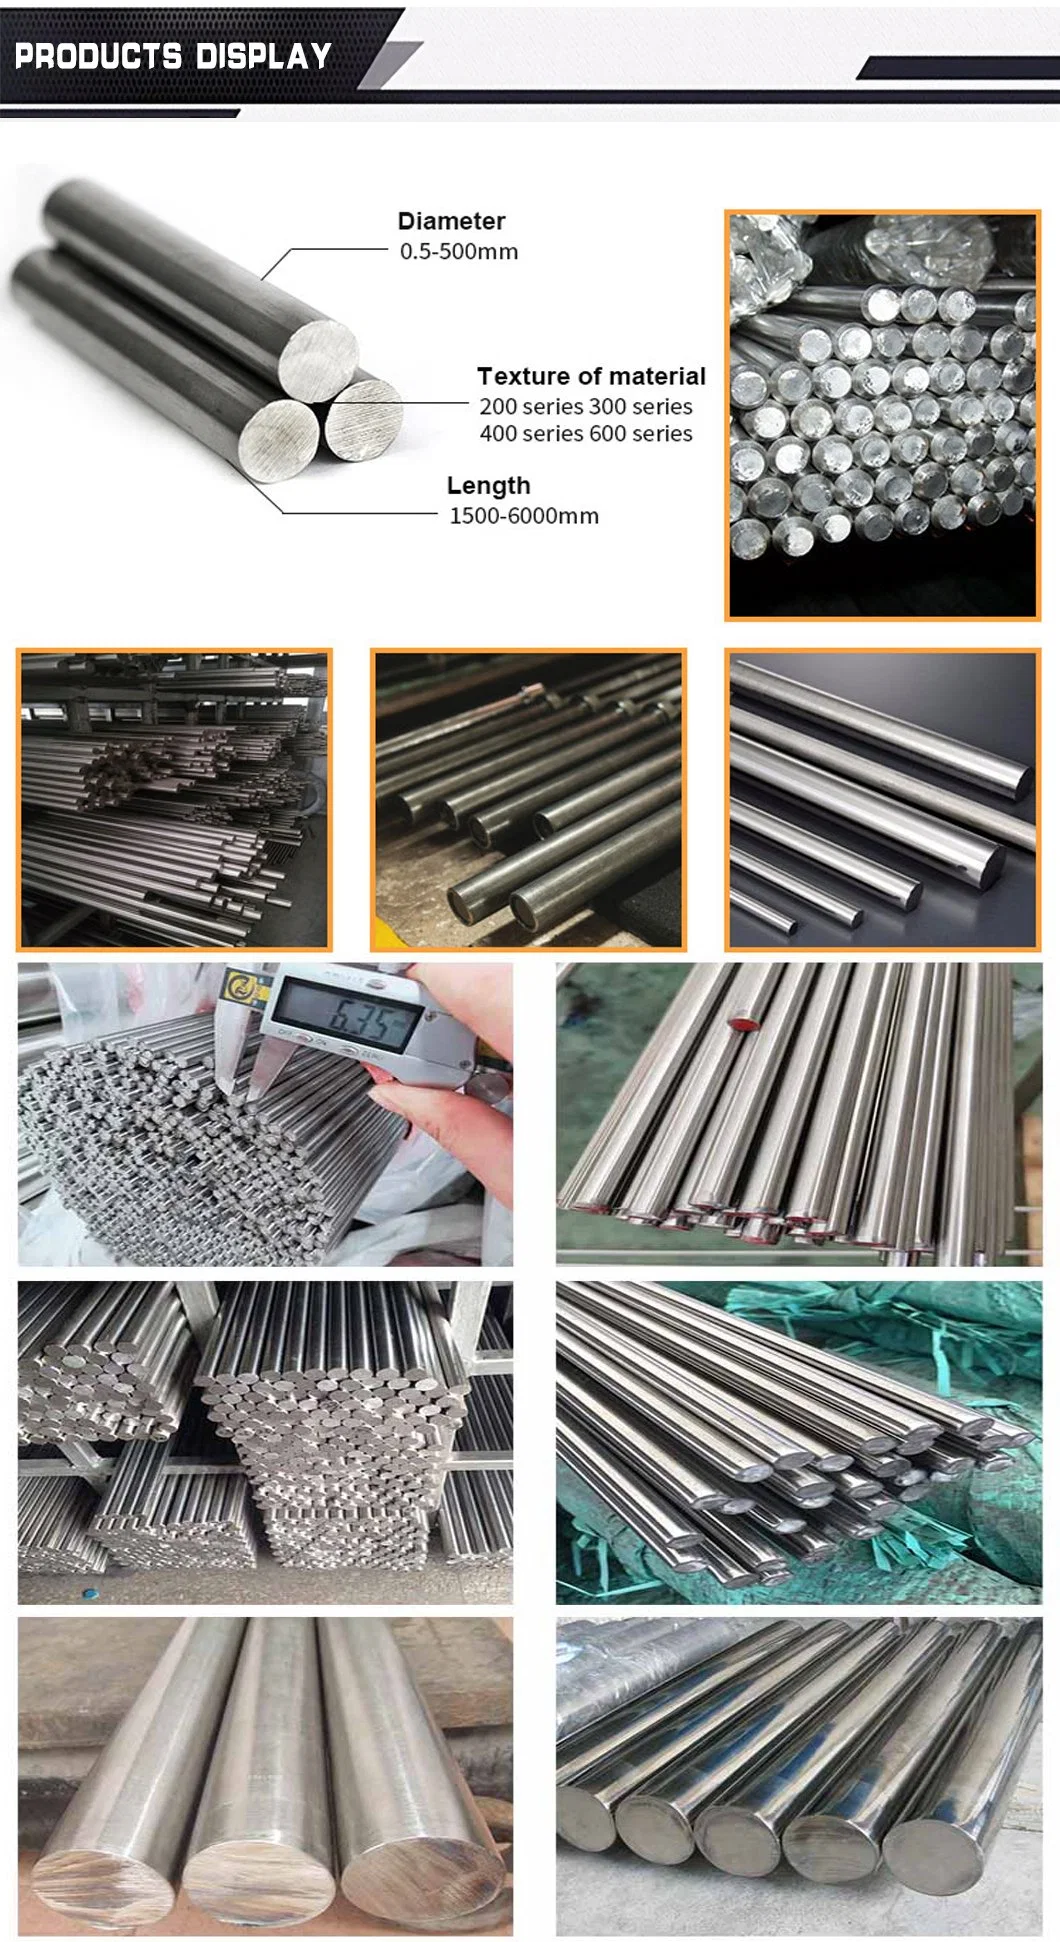 Polished ASTM AISI Ss 17-4pH 2205 904L 401 201 316 416 347 304 10mm 20mm 25mm Bright Stainless Steel Bar Rod for Construction